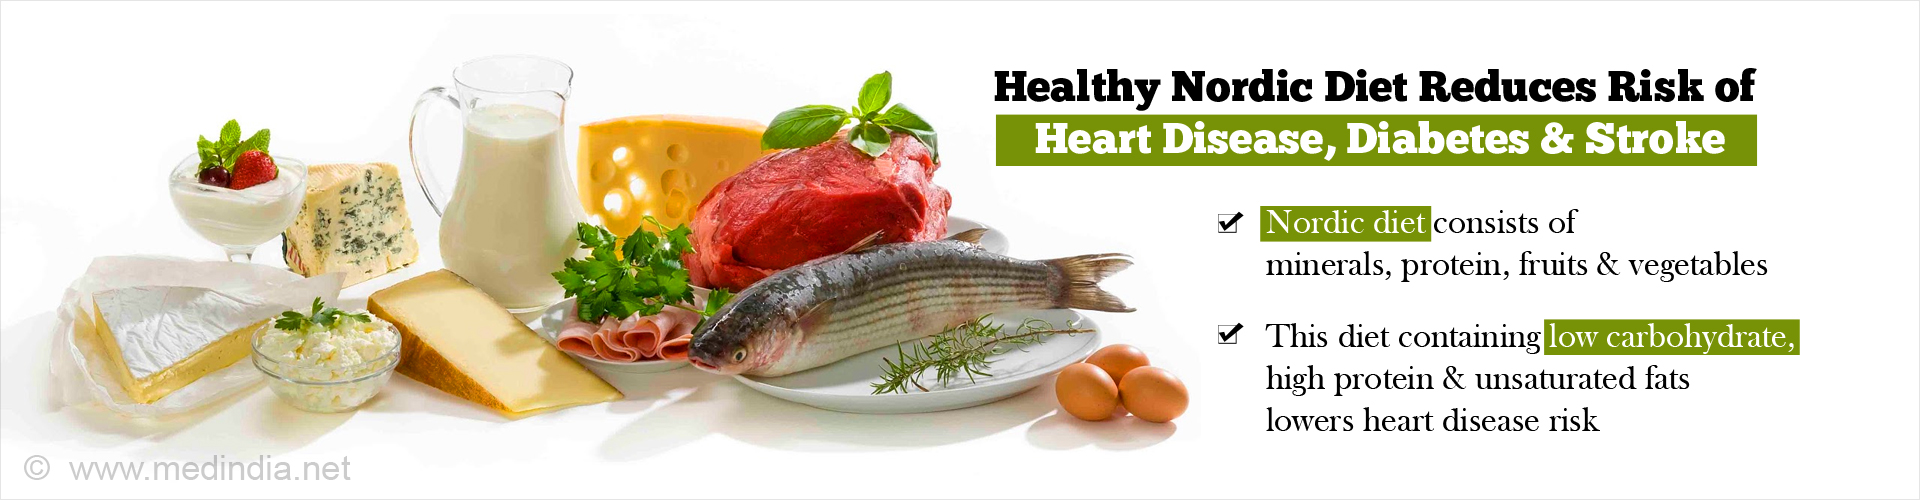 healthy nordic diet reduces risk of heart disease, diabetes and stroke
- nordic diet consists of minerals, protein, fruits and vegetables
- this diet containing low carbohydrates, high protein & unsaturated fats lowers heart disease risk